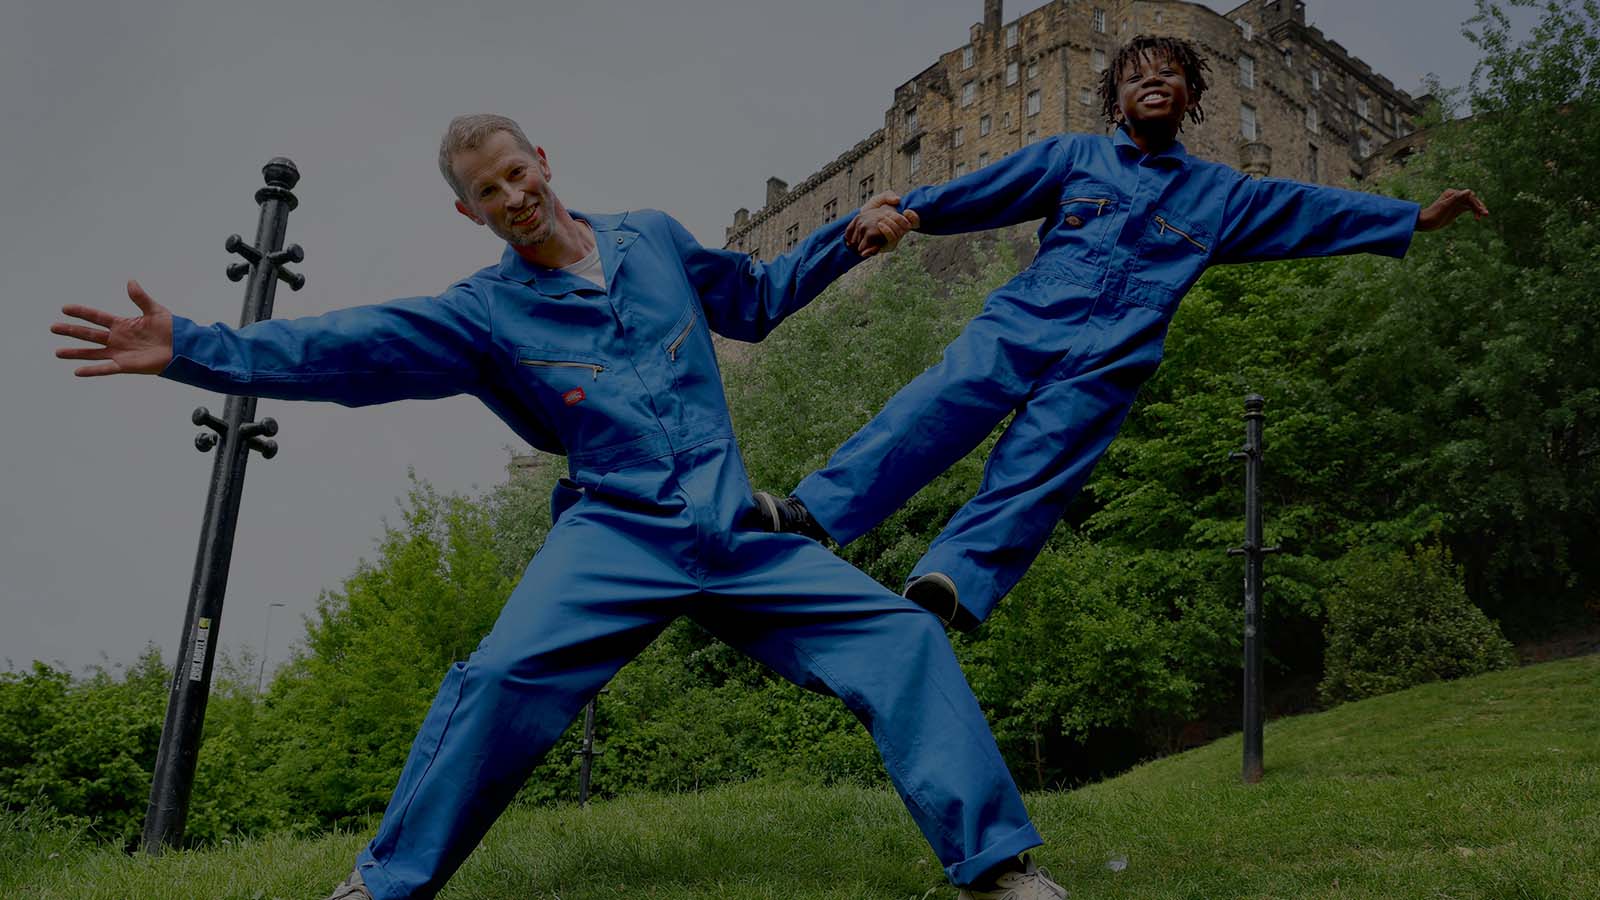 A man and a boy in bright blue jumpsuits in a garden. They are dancing joyfully with each other, striking a pose with the boy standing on the mans legs as they stay connected by holding hands.